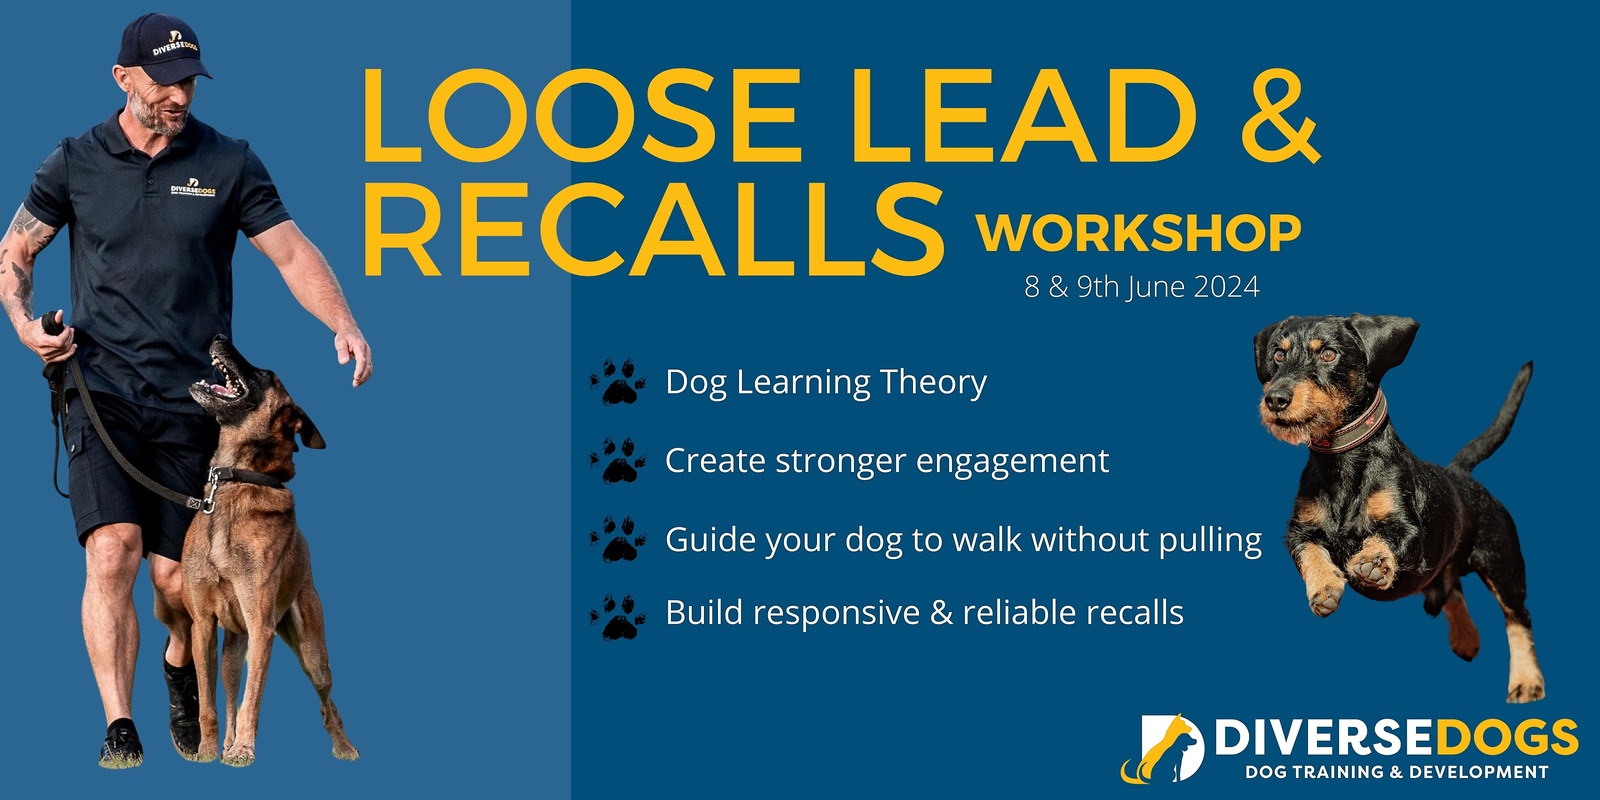 Banner image for DIVERSE DOGS LOOSE LEAD WALKING & RECALLS